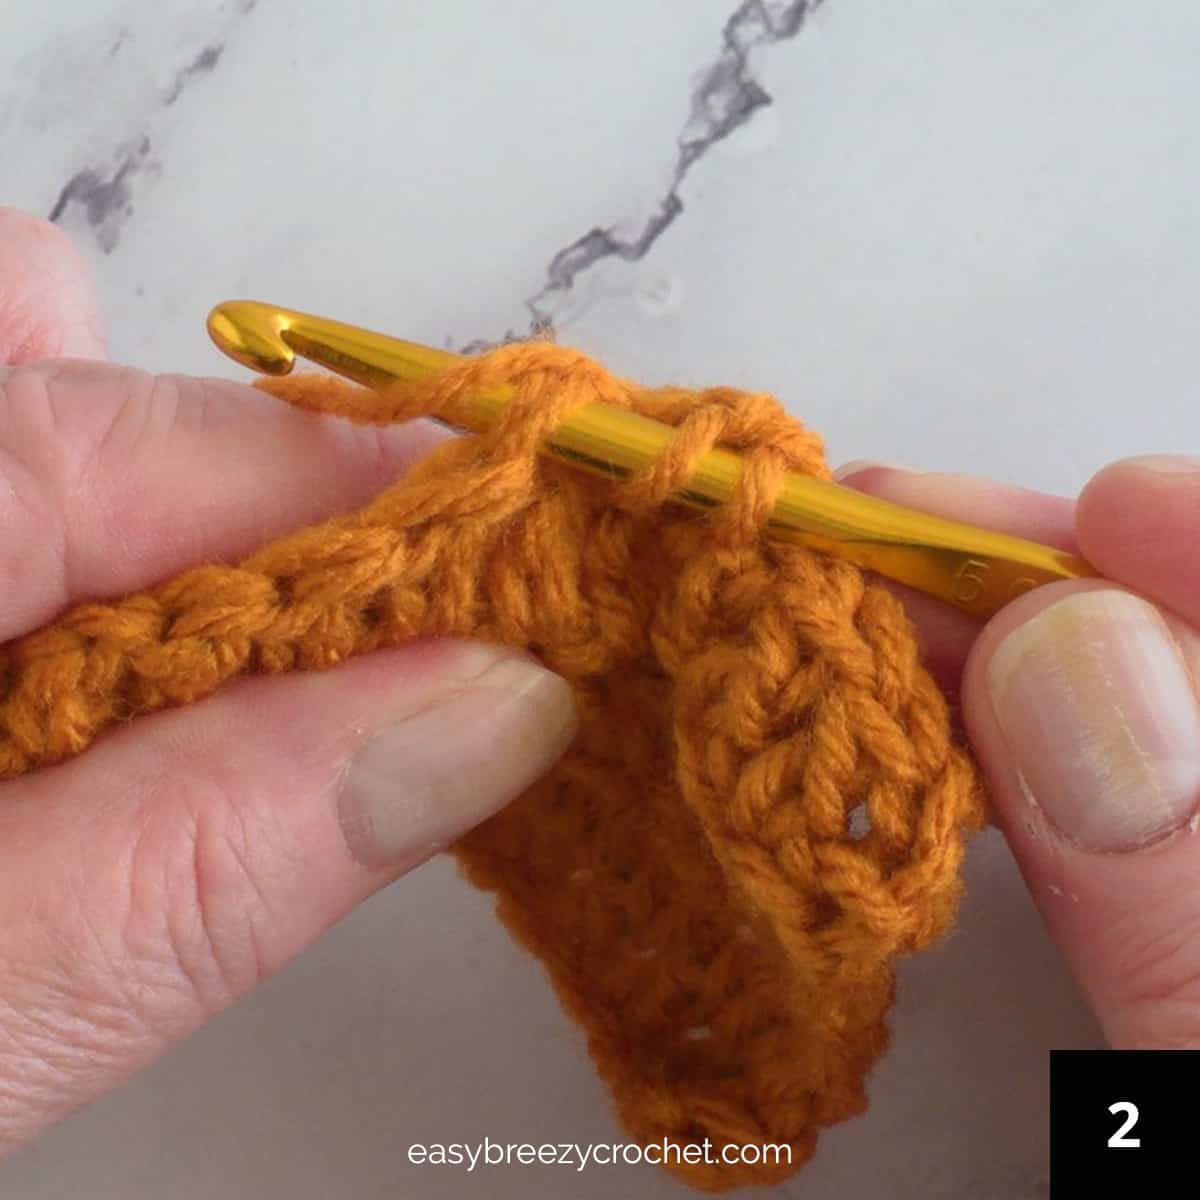 A crochet inserted into a stitch.